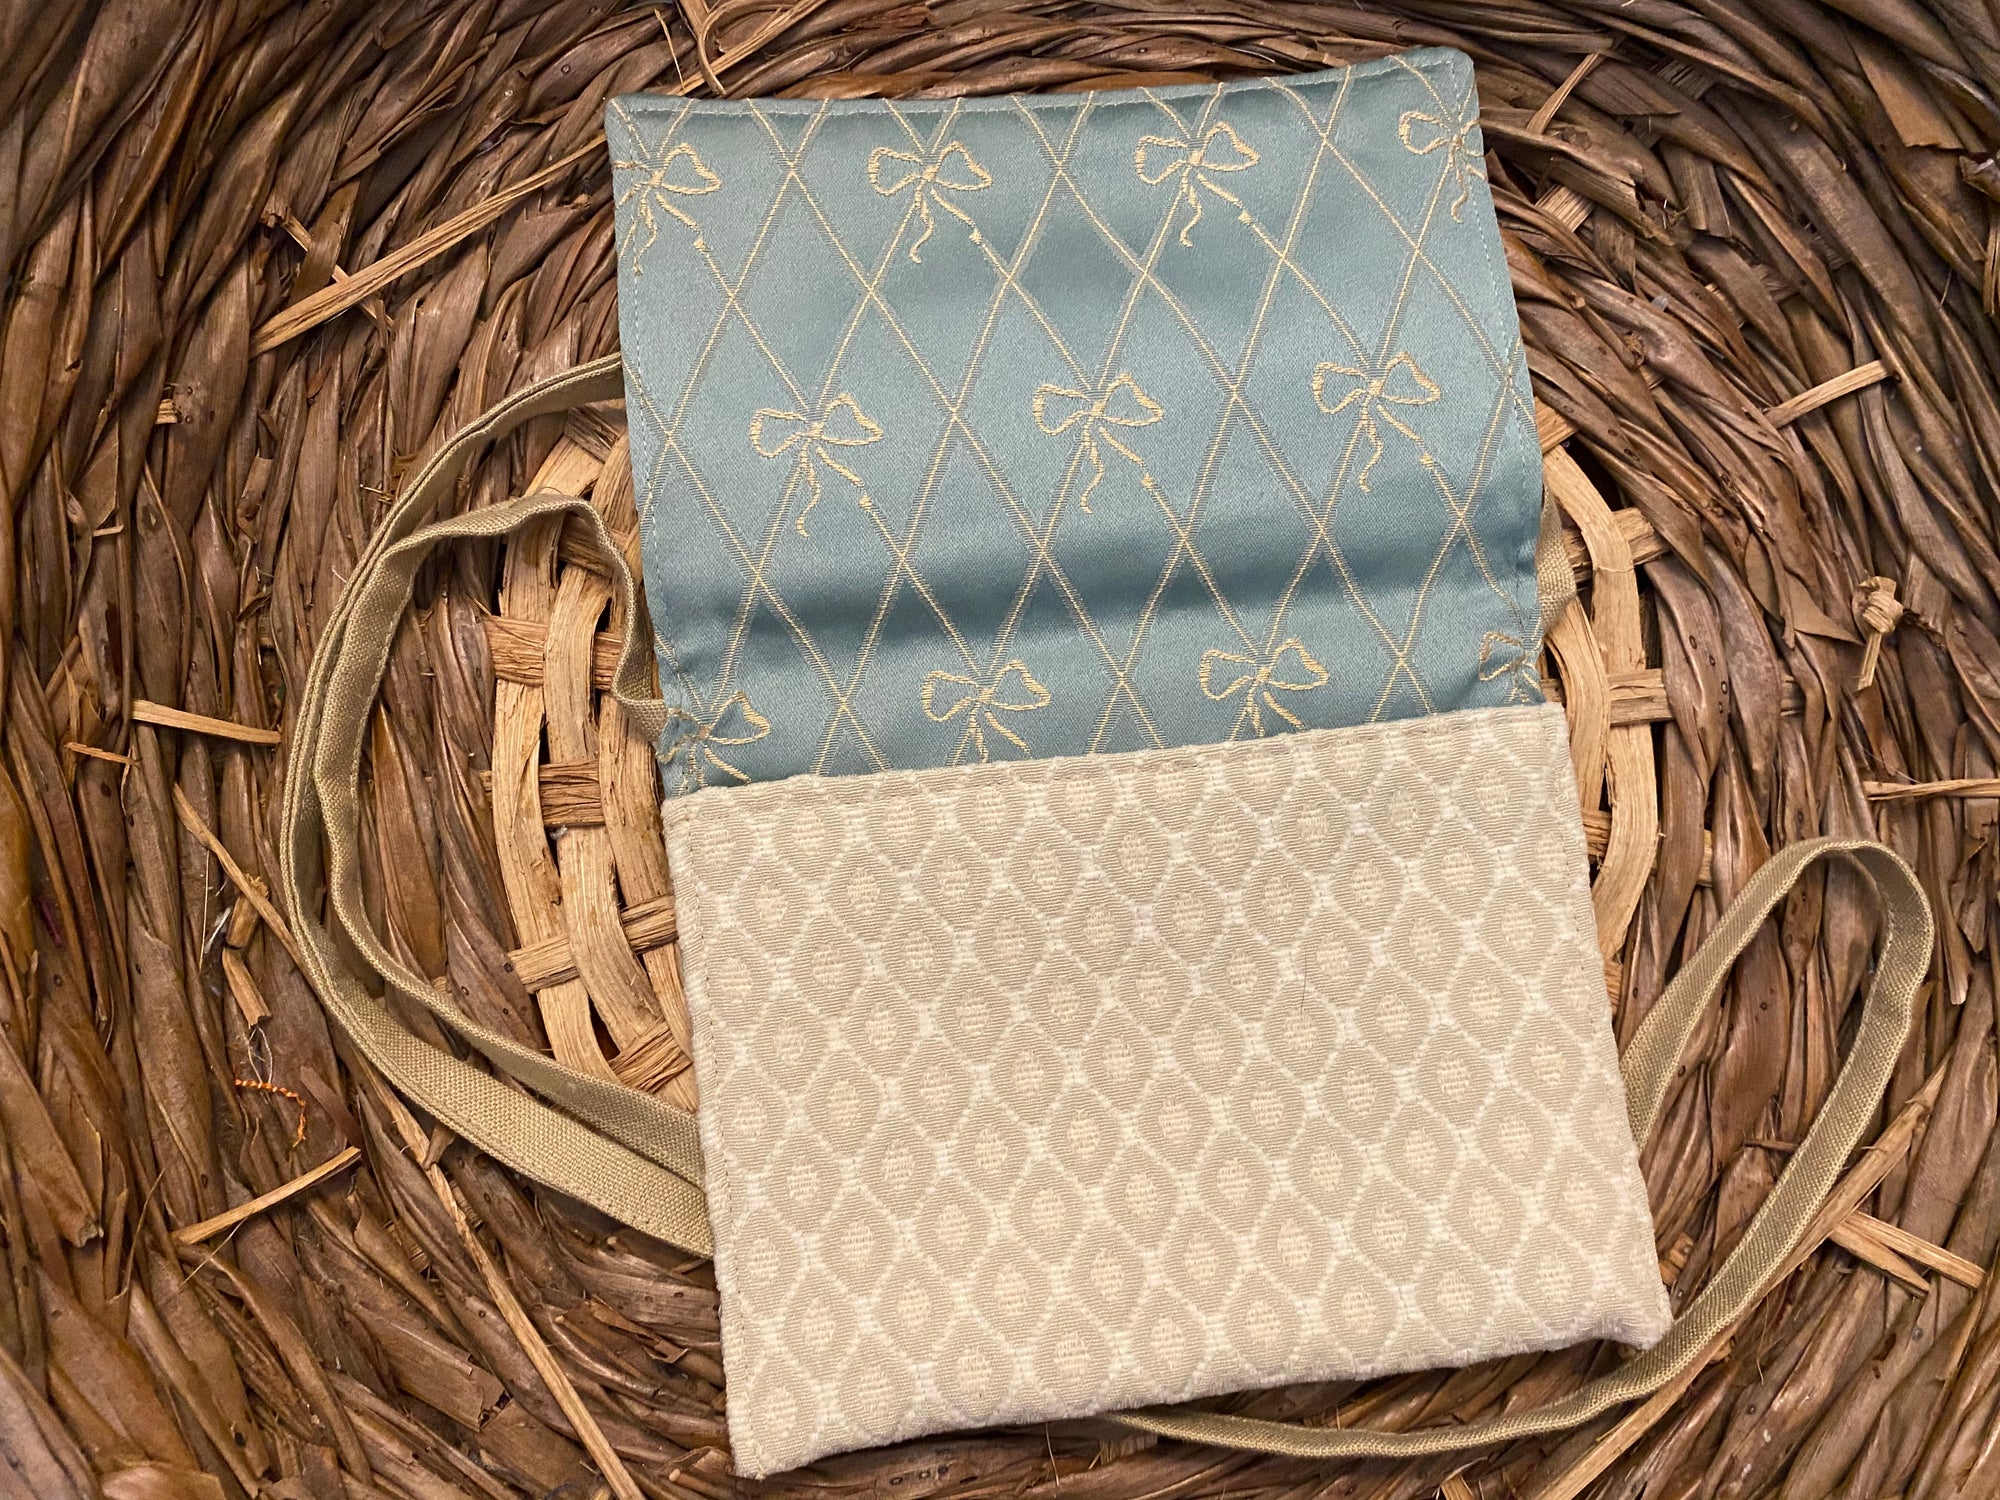 Small Satchel cream and oatmeal textured pattern with ice blue and cream satin inside